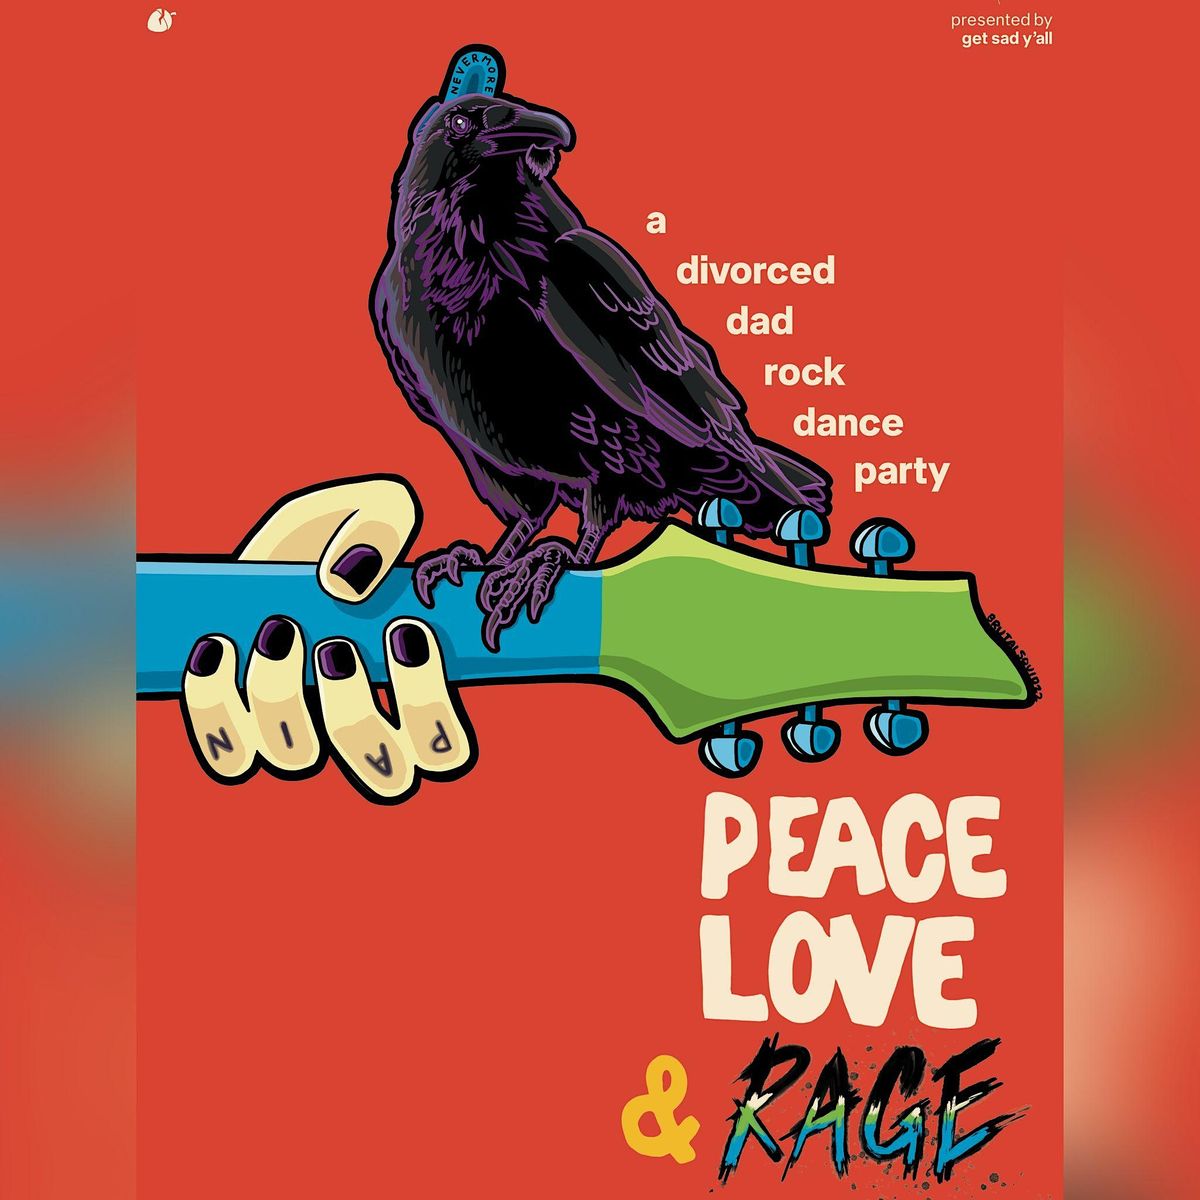 PEACE LOVE & RAGE: A DIVORCED DAD ROCK DANCE PARTY at The Milestone on 2\/17